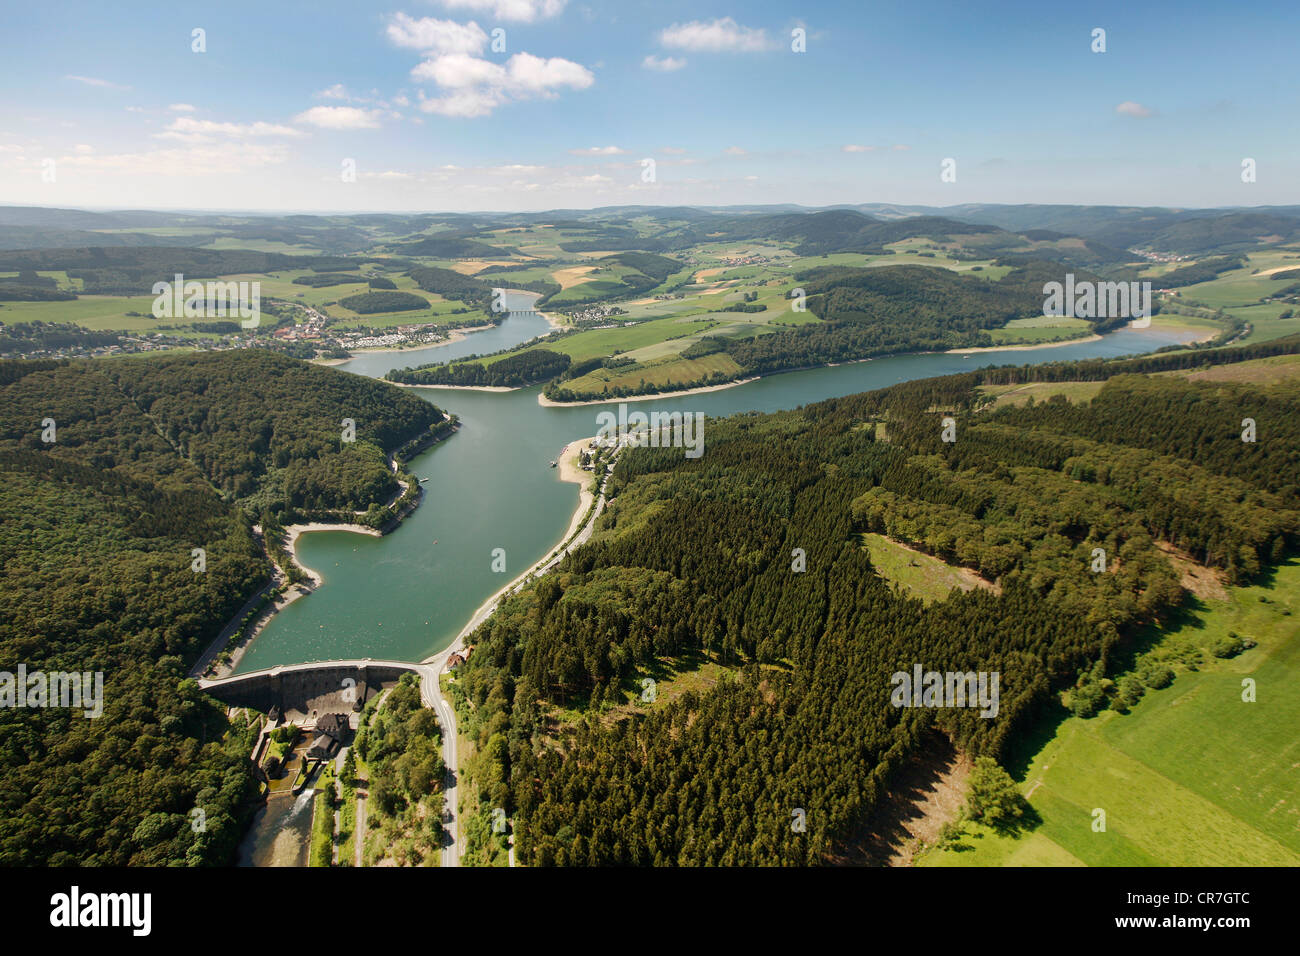 Aerial view, Diemelsee Nature Park, national park, beech forests, UNESCO World Heritage Site, Willingen Upland, Sauerland Stock Photo